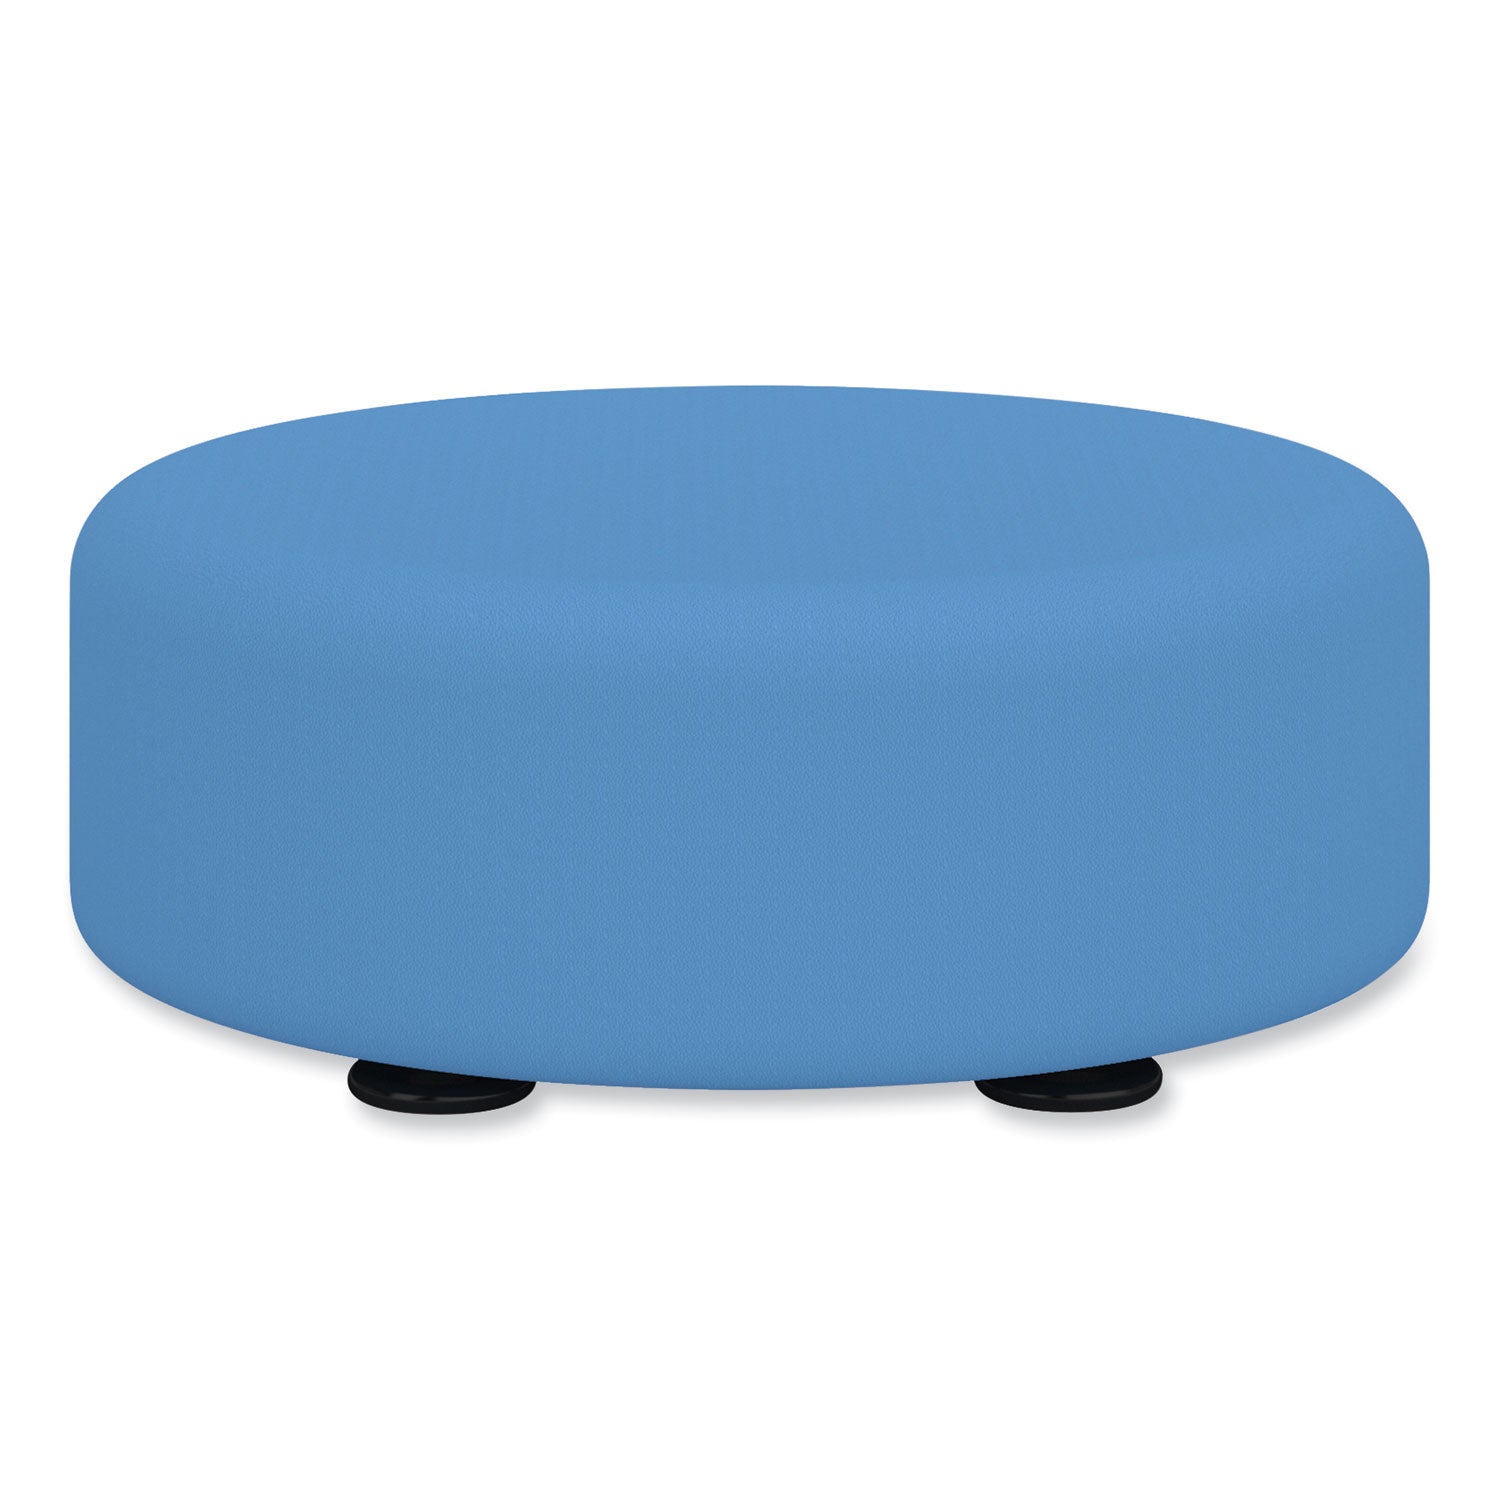 learn-15-round-vinyl-floor-seat-15-dia-x-575h-baby-blue-ships-in-1-3-business-days_saf8121buv - 1